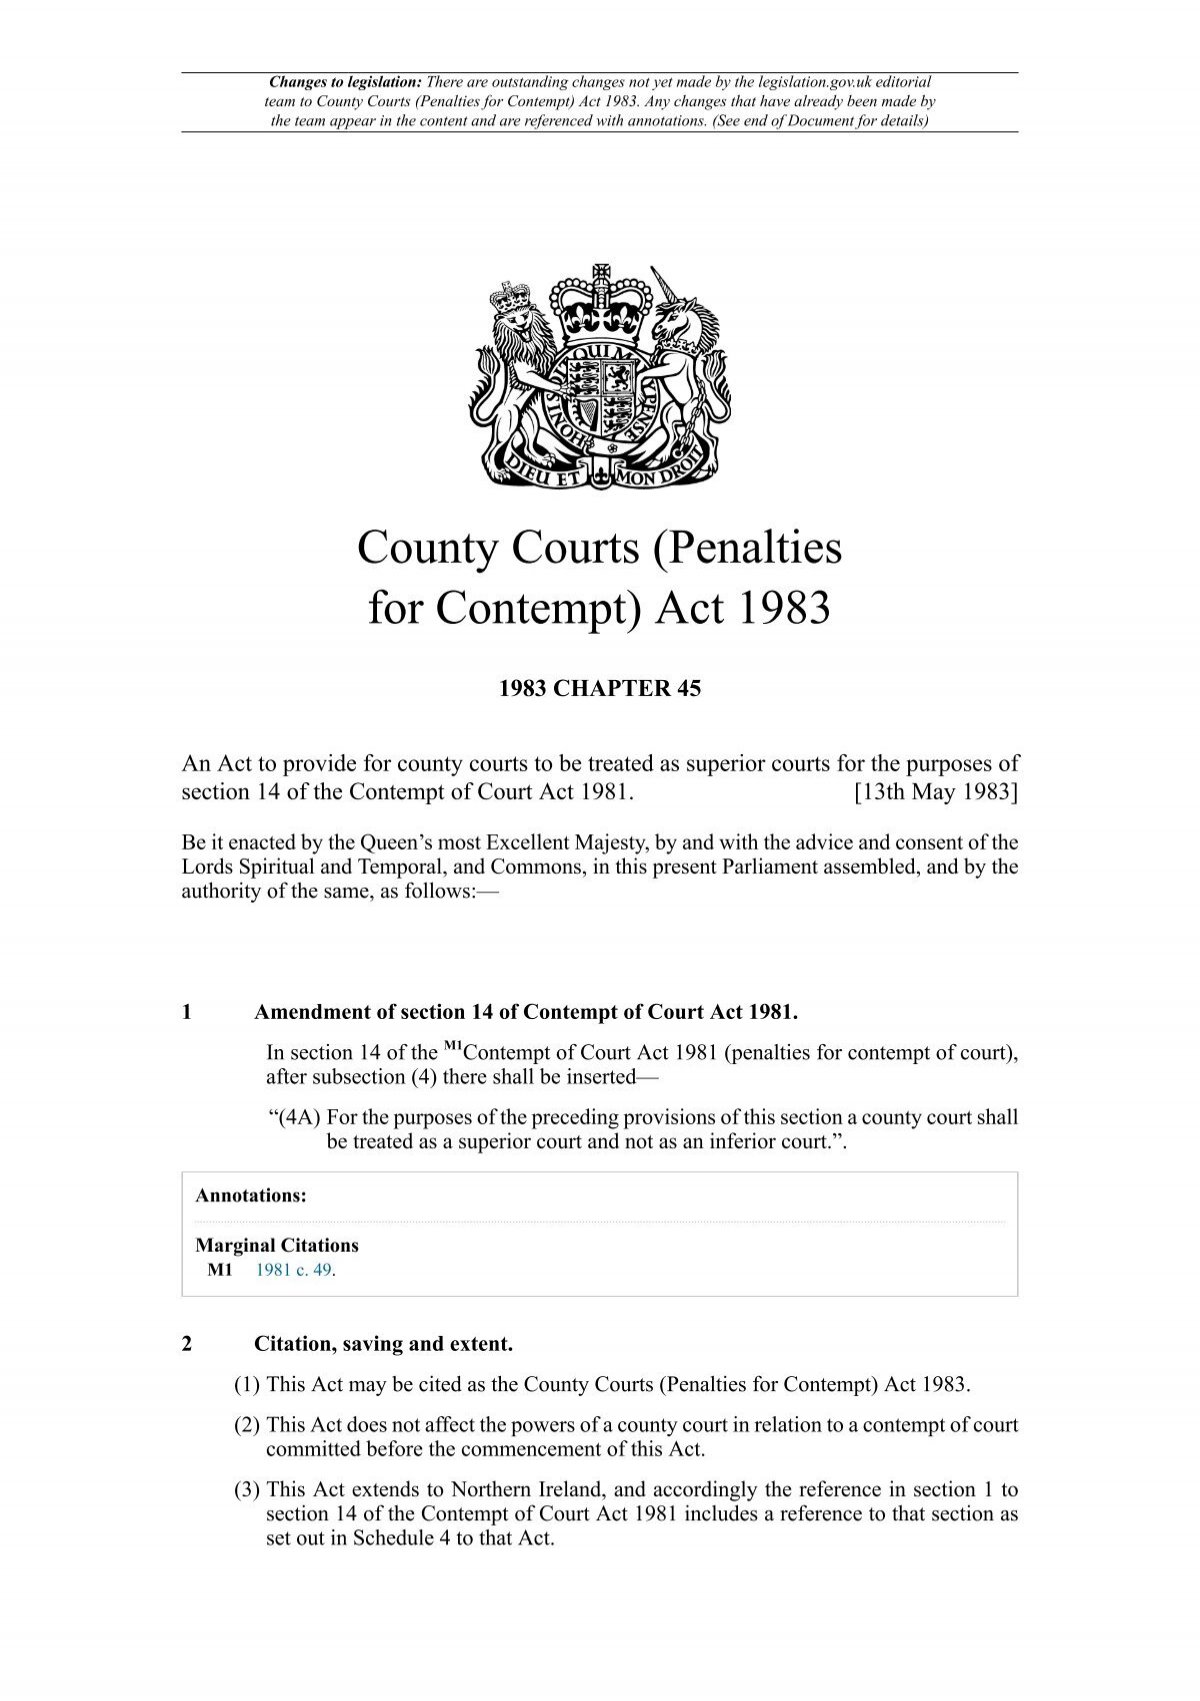 County Courts (Penalties for Contempt) Act 1983 MoneyClaimsUK